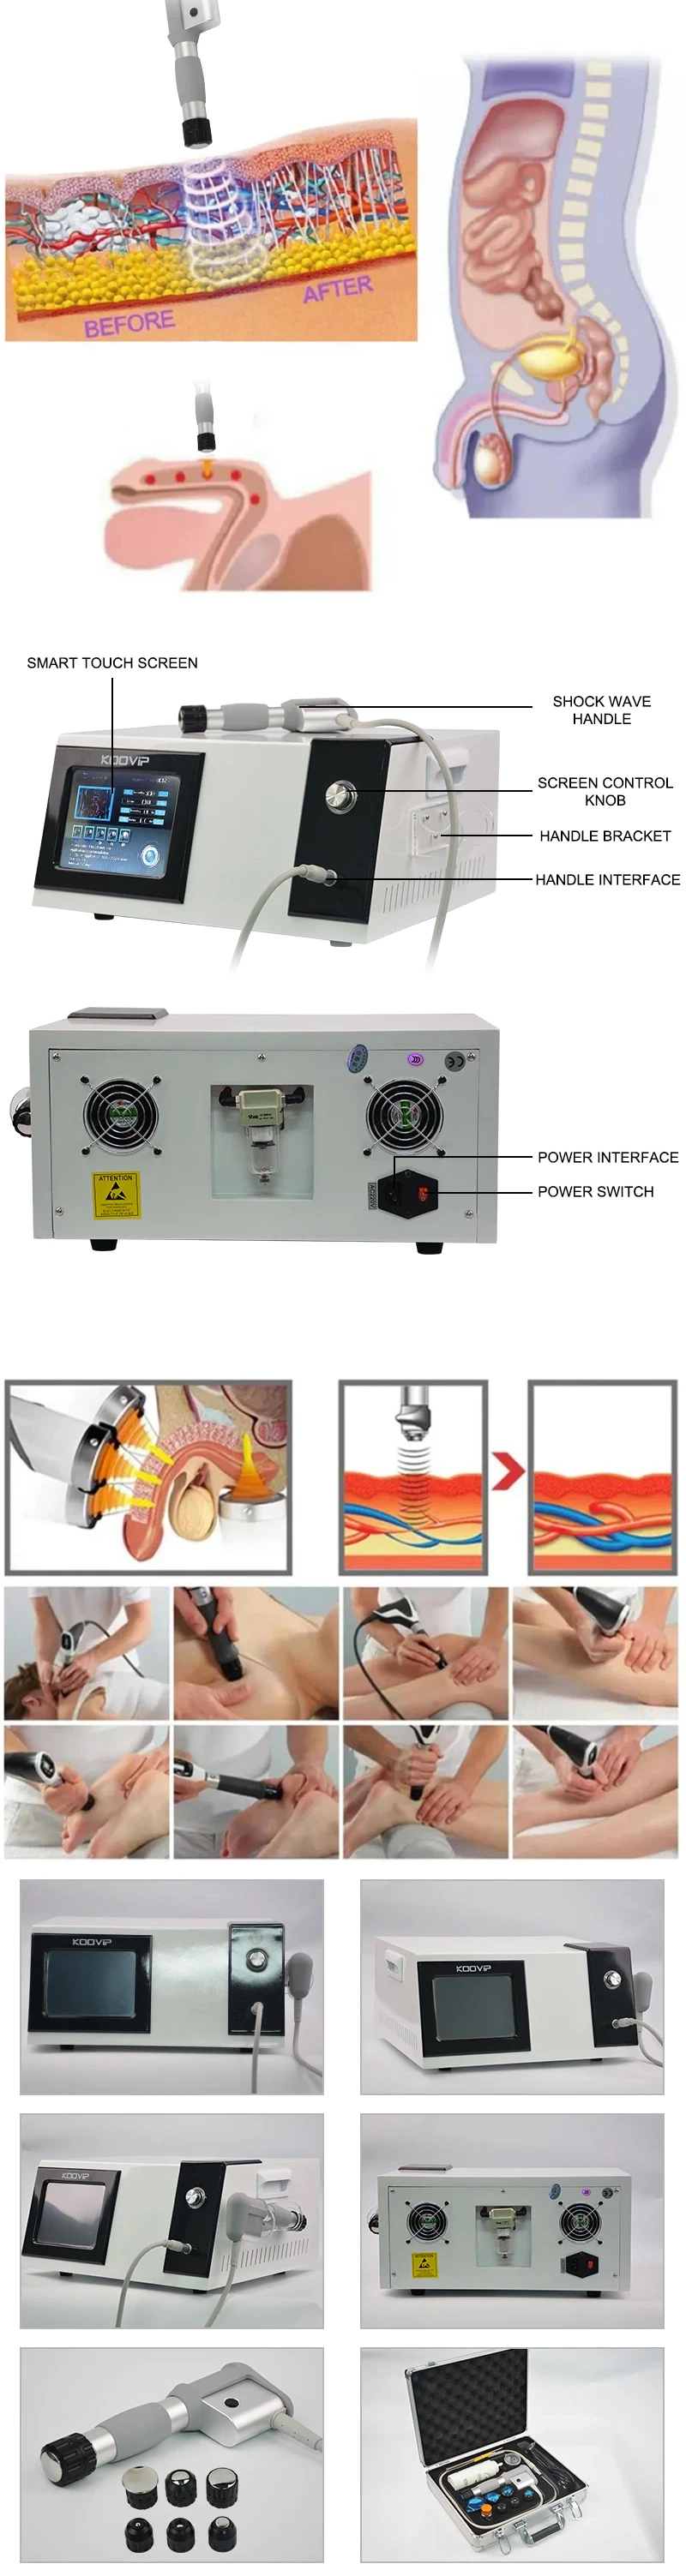 Shockwave Shock Wave Therapy Machine Focused Orthopedic Radial Radial ED Extracorporeal Physiotherapy Dysfunction for Men